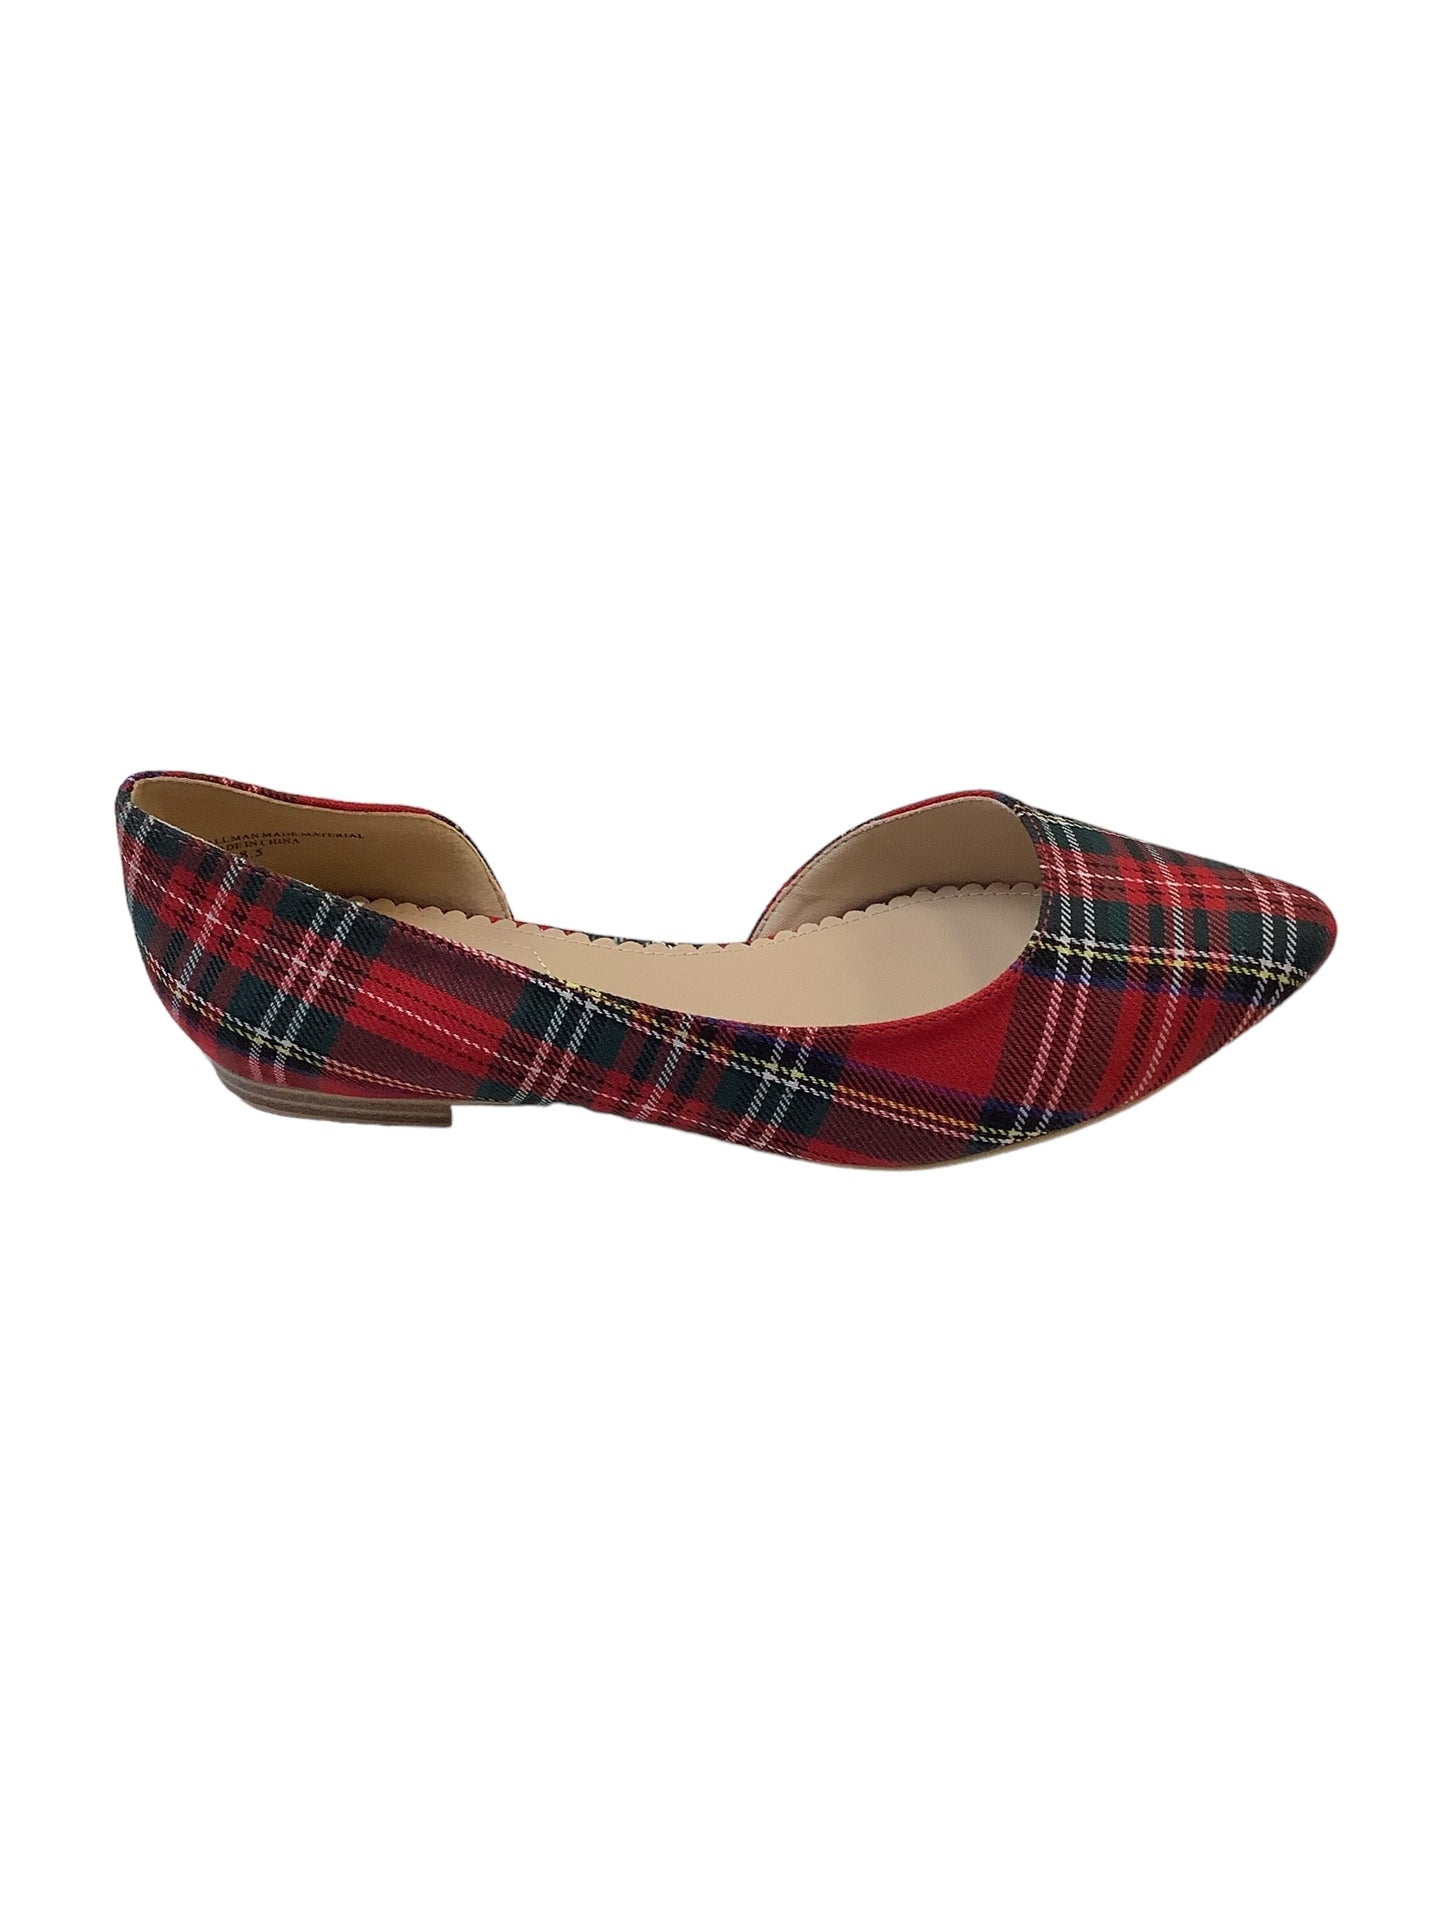 Shoes Flats By Isaac Mizrahi  Size: 8.5